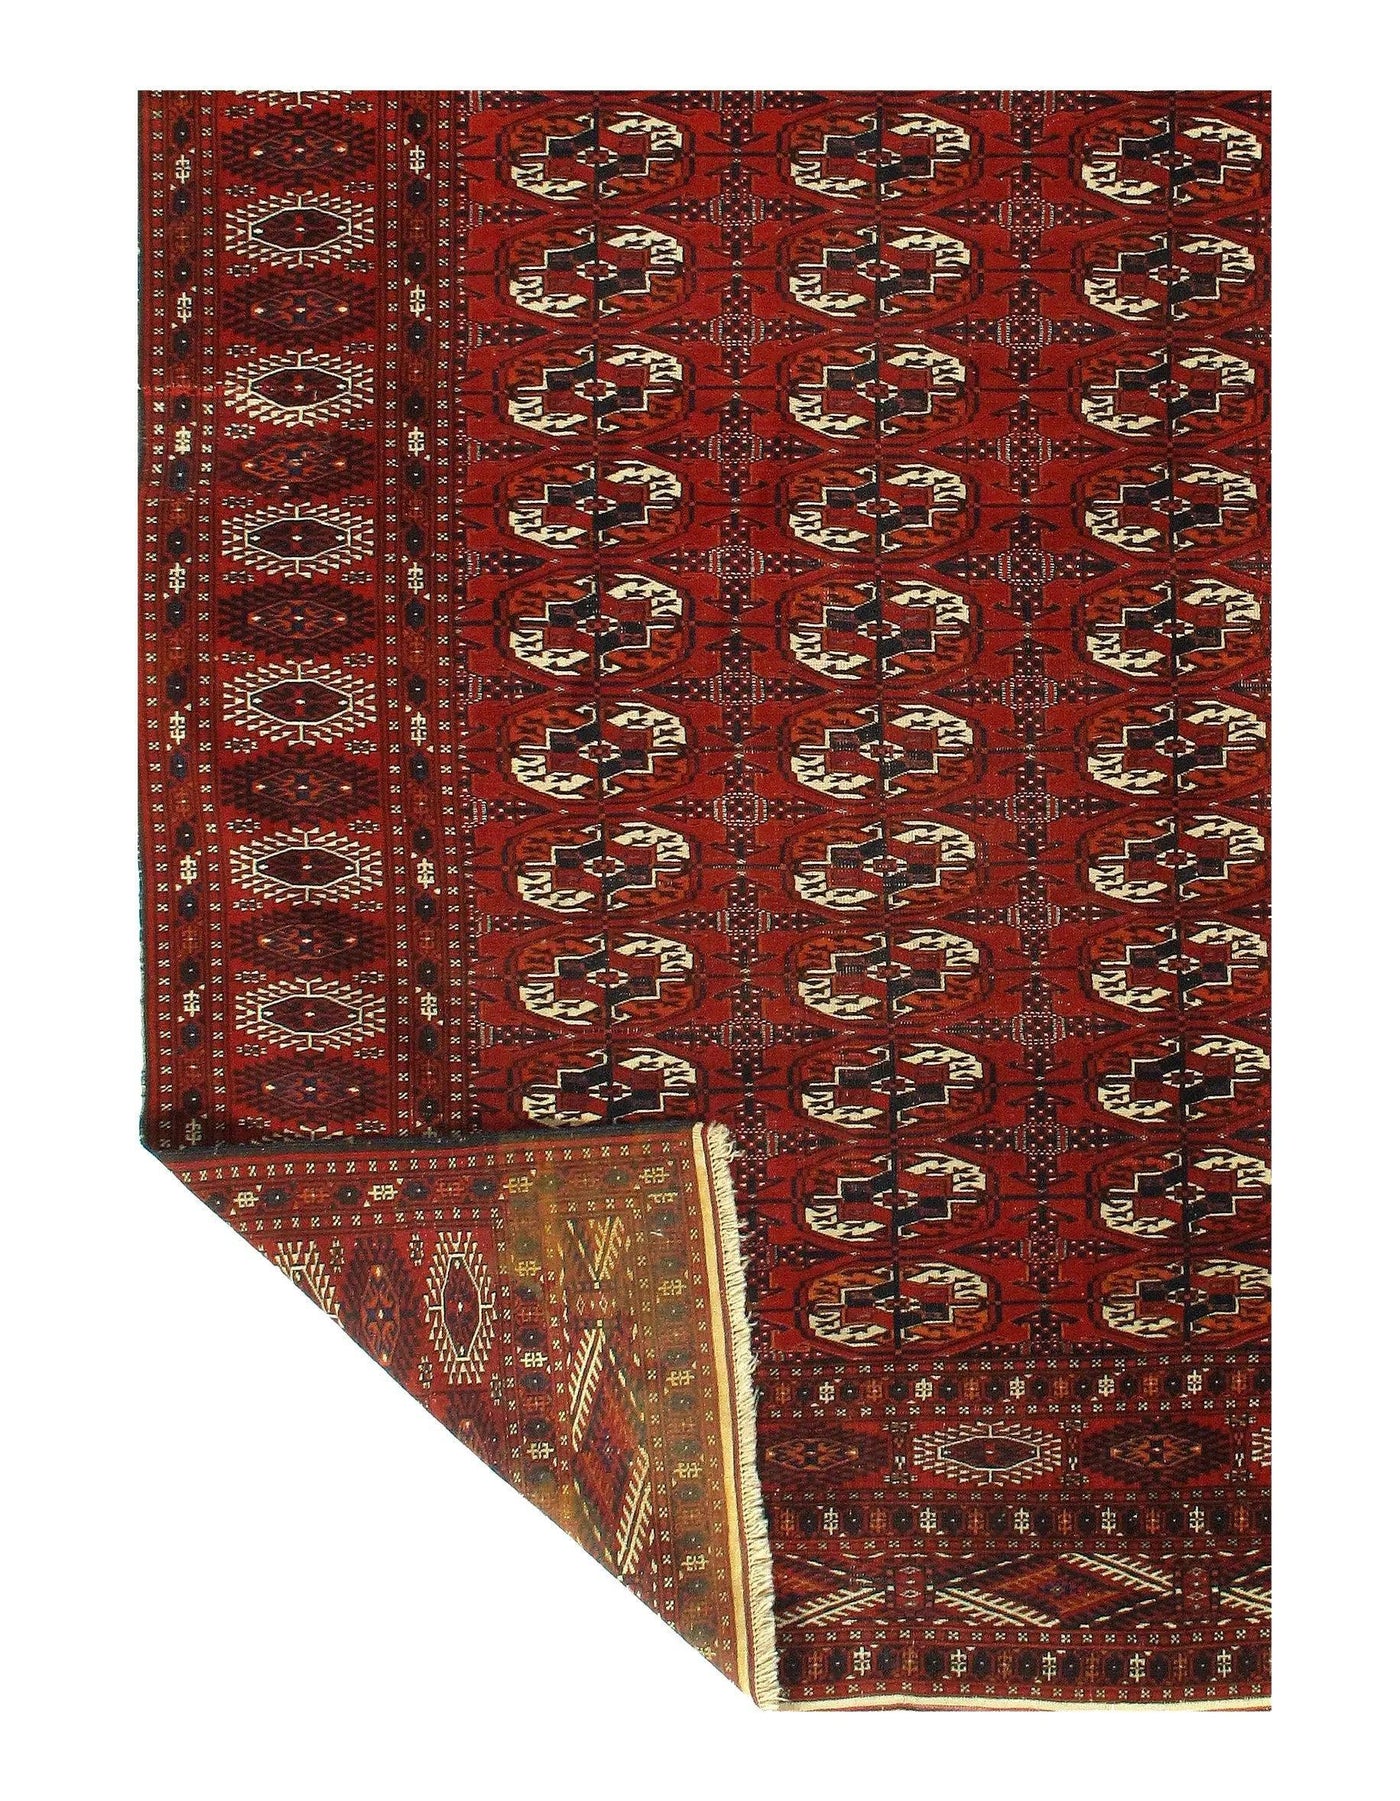 Red Russian Antique Turkman Rug - 5'6'' X 8'11''